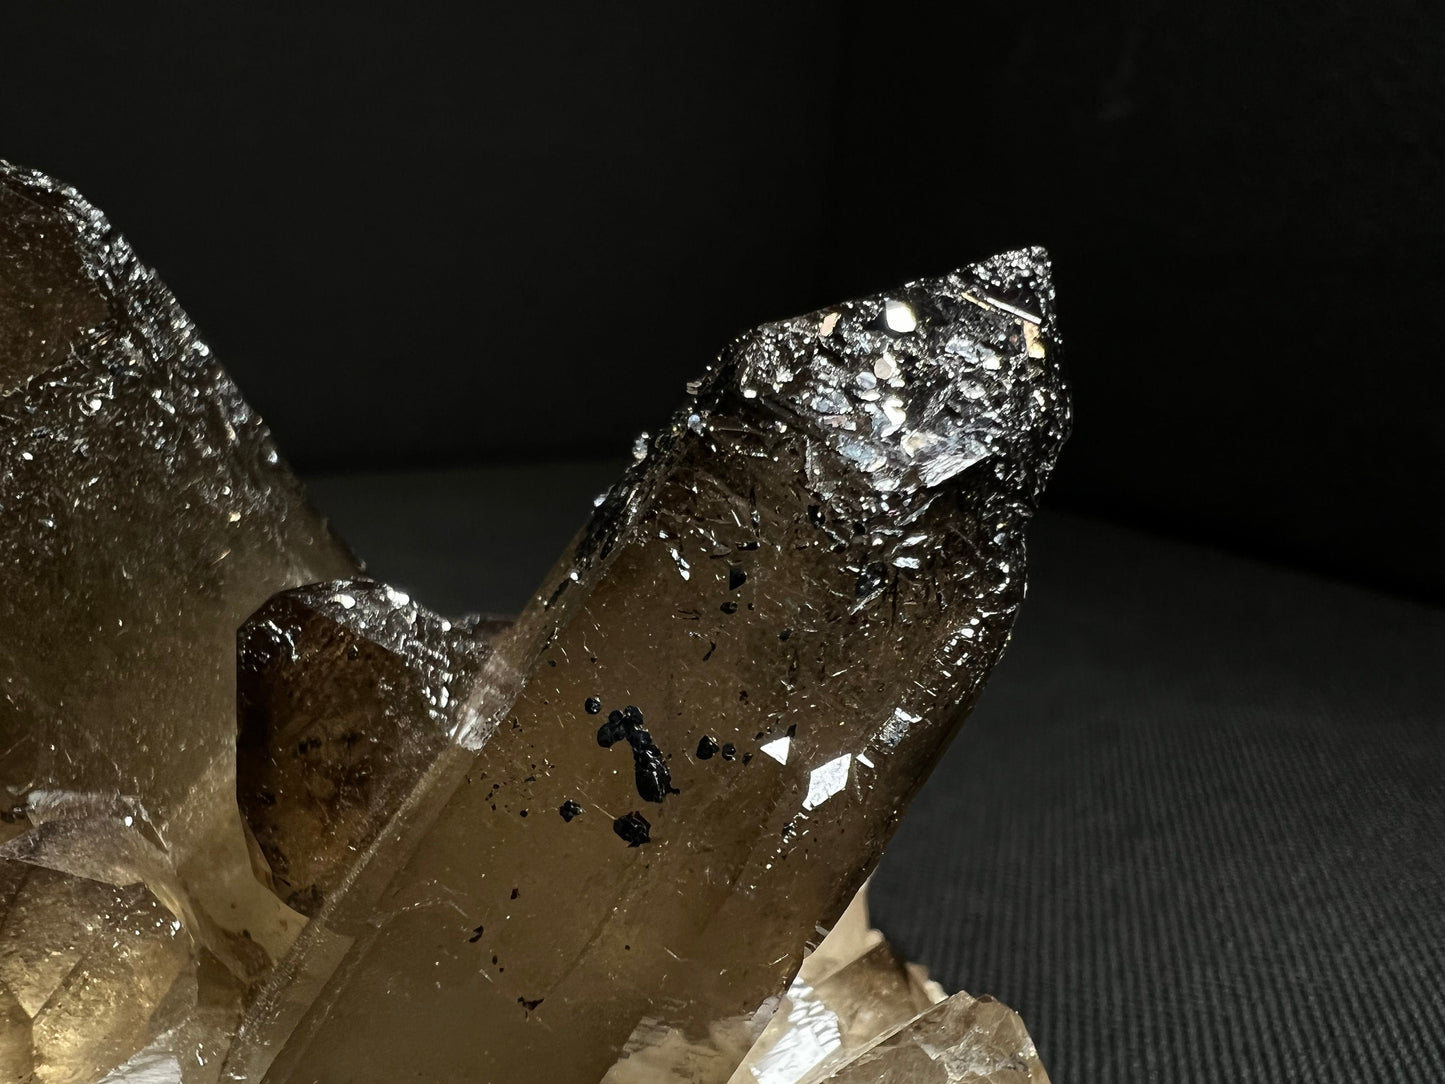 Smoky Quartz Cluster With Hematite Inclusions- Stand Included, Statement Piece, Crystal Healing, Collectors Piece